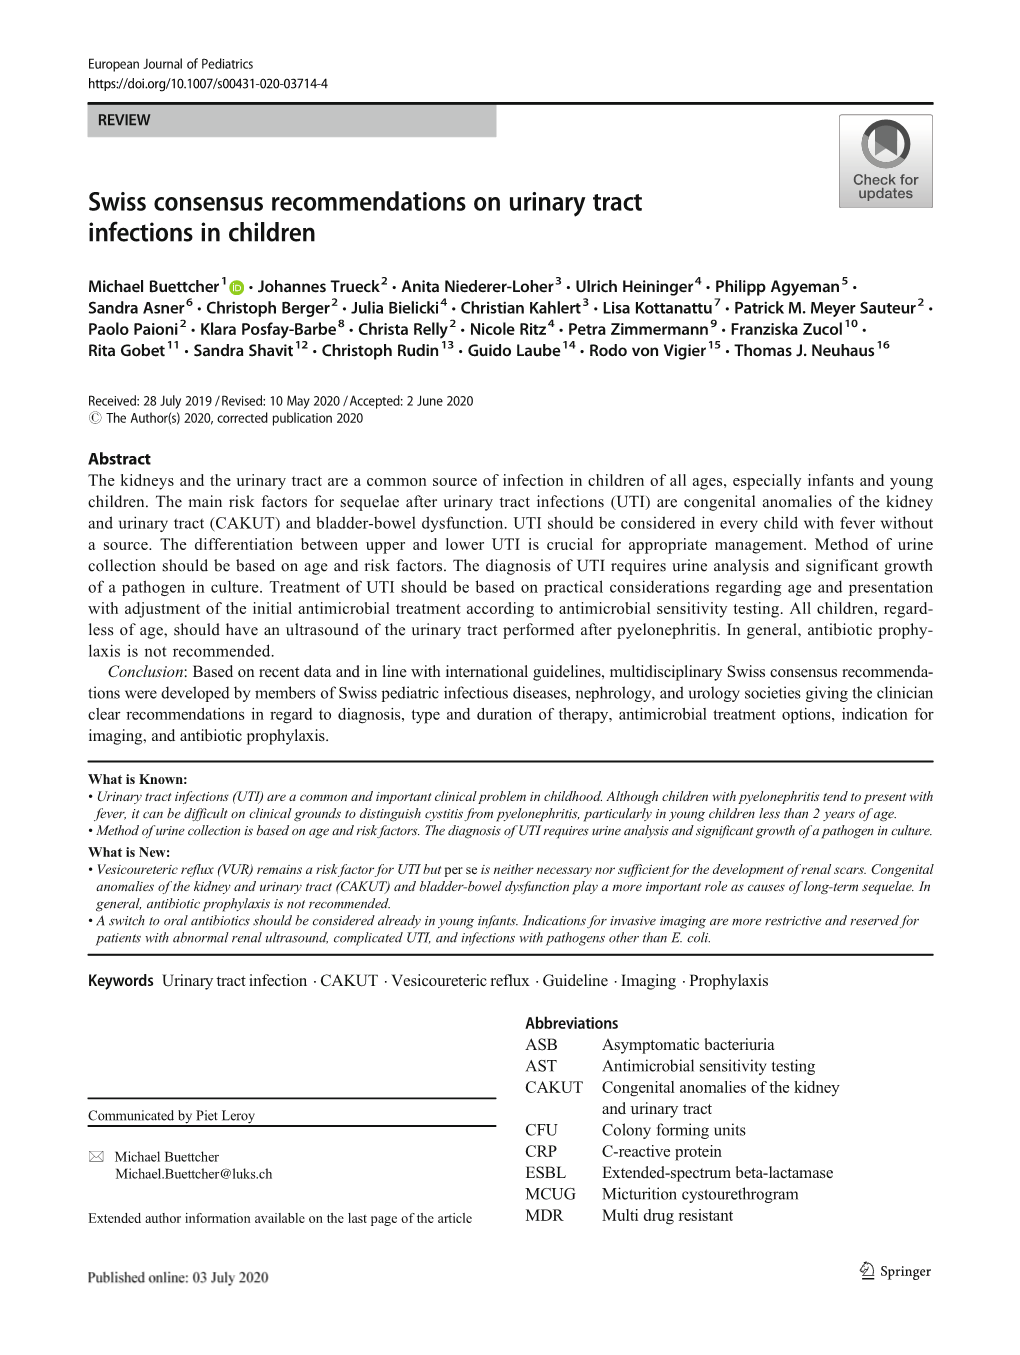 Swiss Consensus Recommendations on Urinary Tract Infections in Children